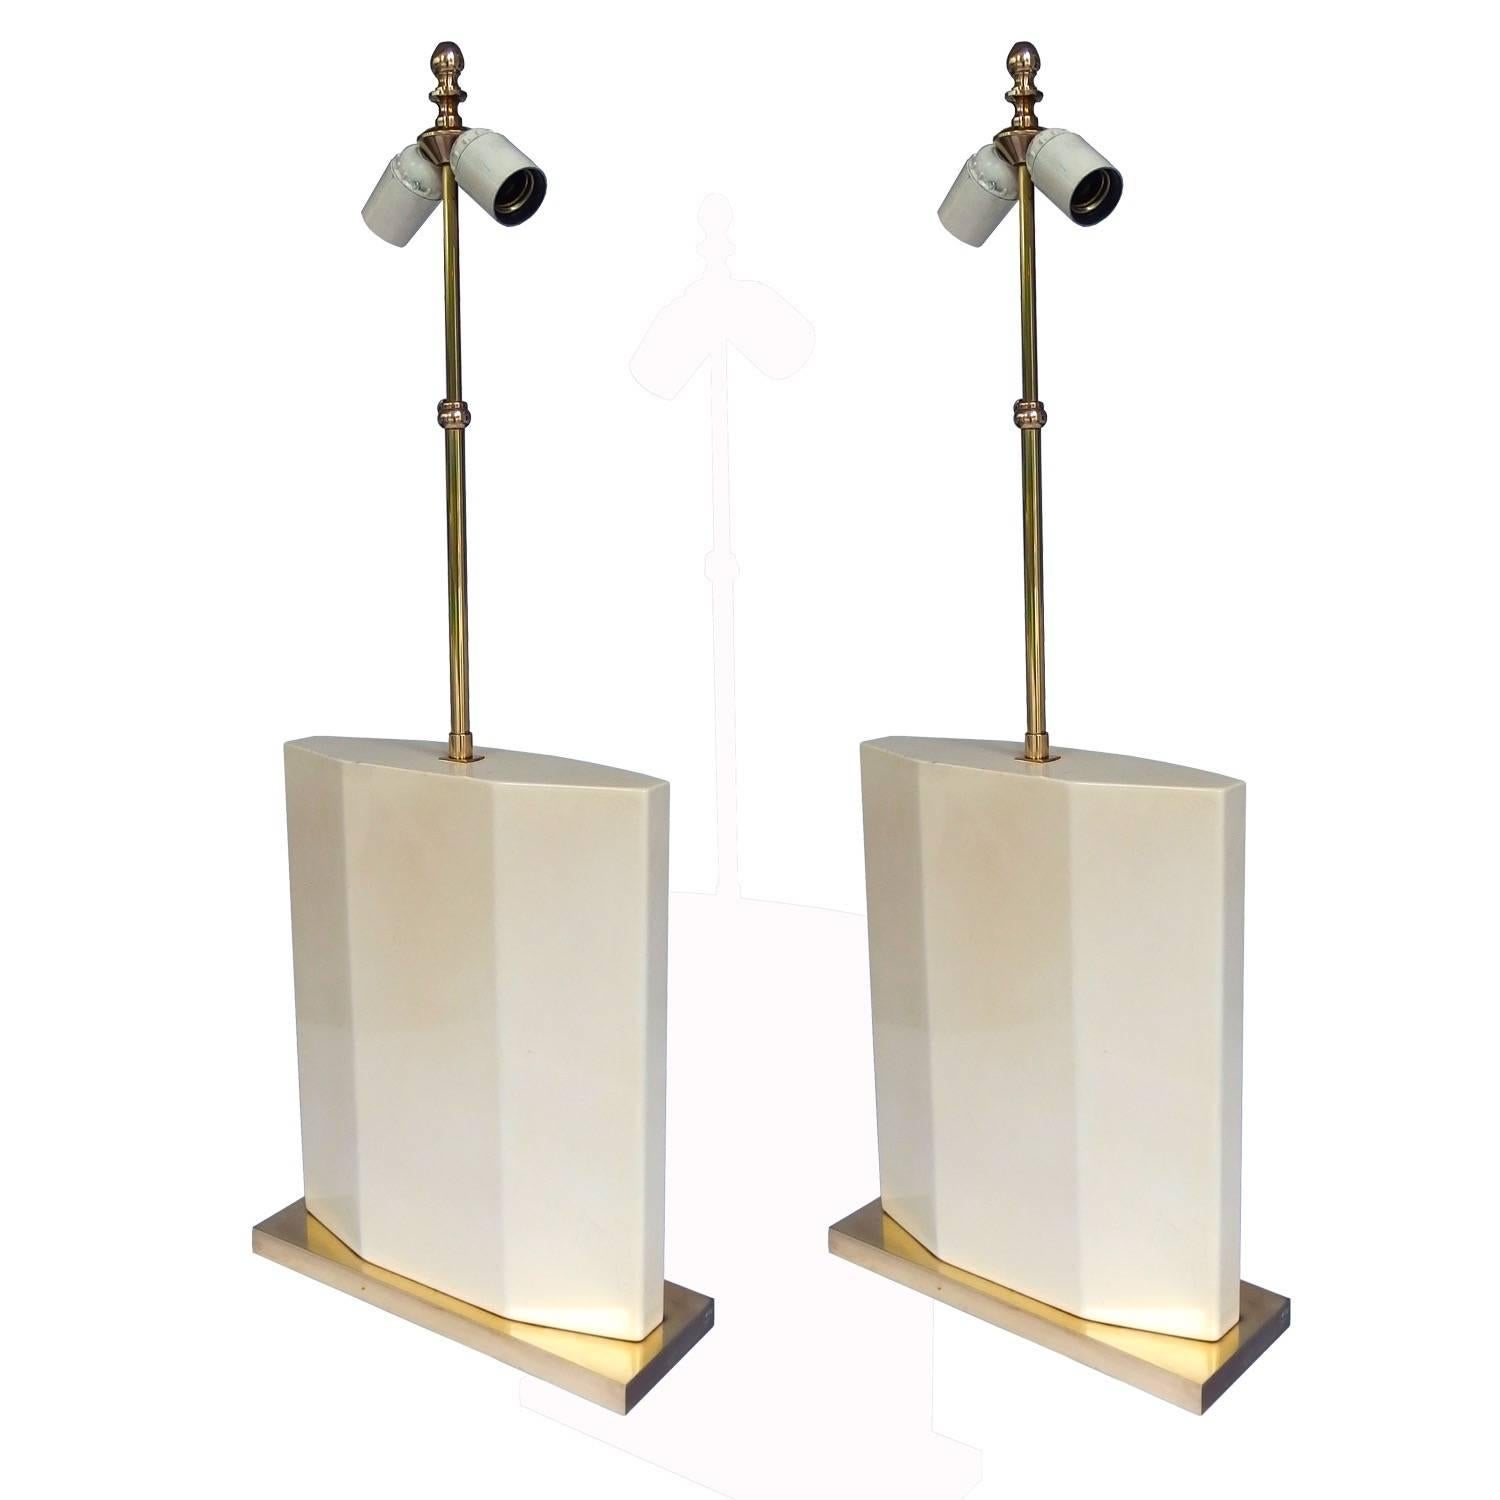 Pair of 1970s white enamel table lamps on brass feet by Roger Vanhevel. The height without the stem is 39cm. The blue-grey silk shades with gold lining are H 37, W 53, D 39cm.


